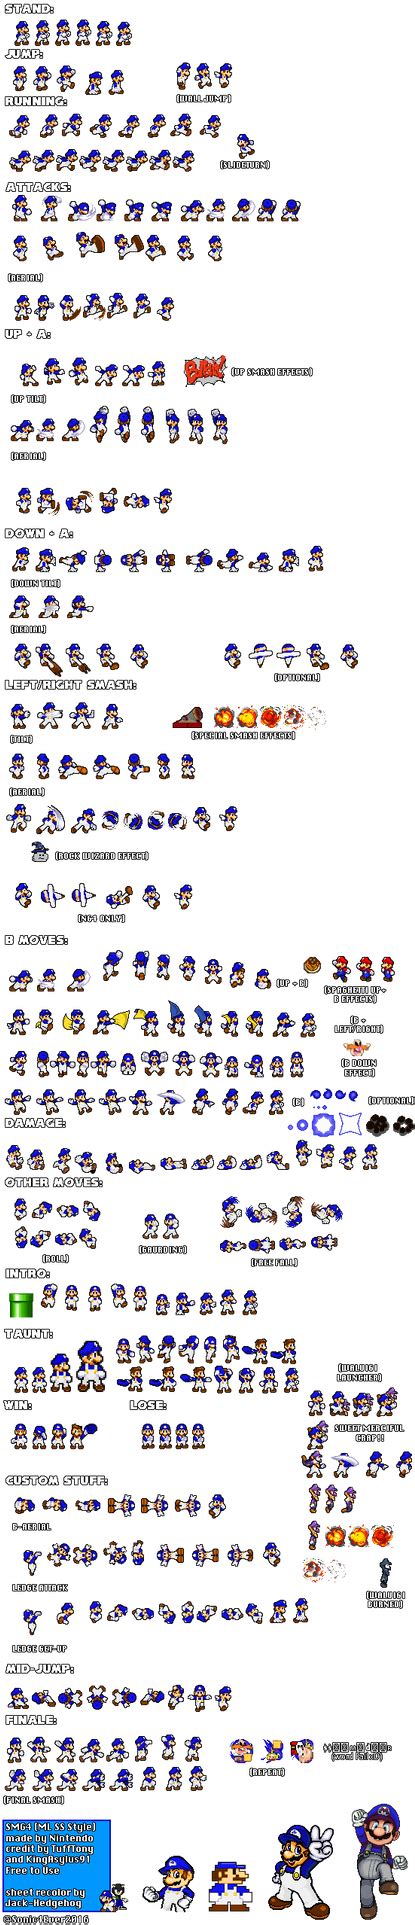 Ultimate Smg4 Sprite Sheets By Jh Production On Deviantart